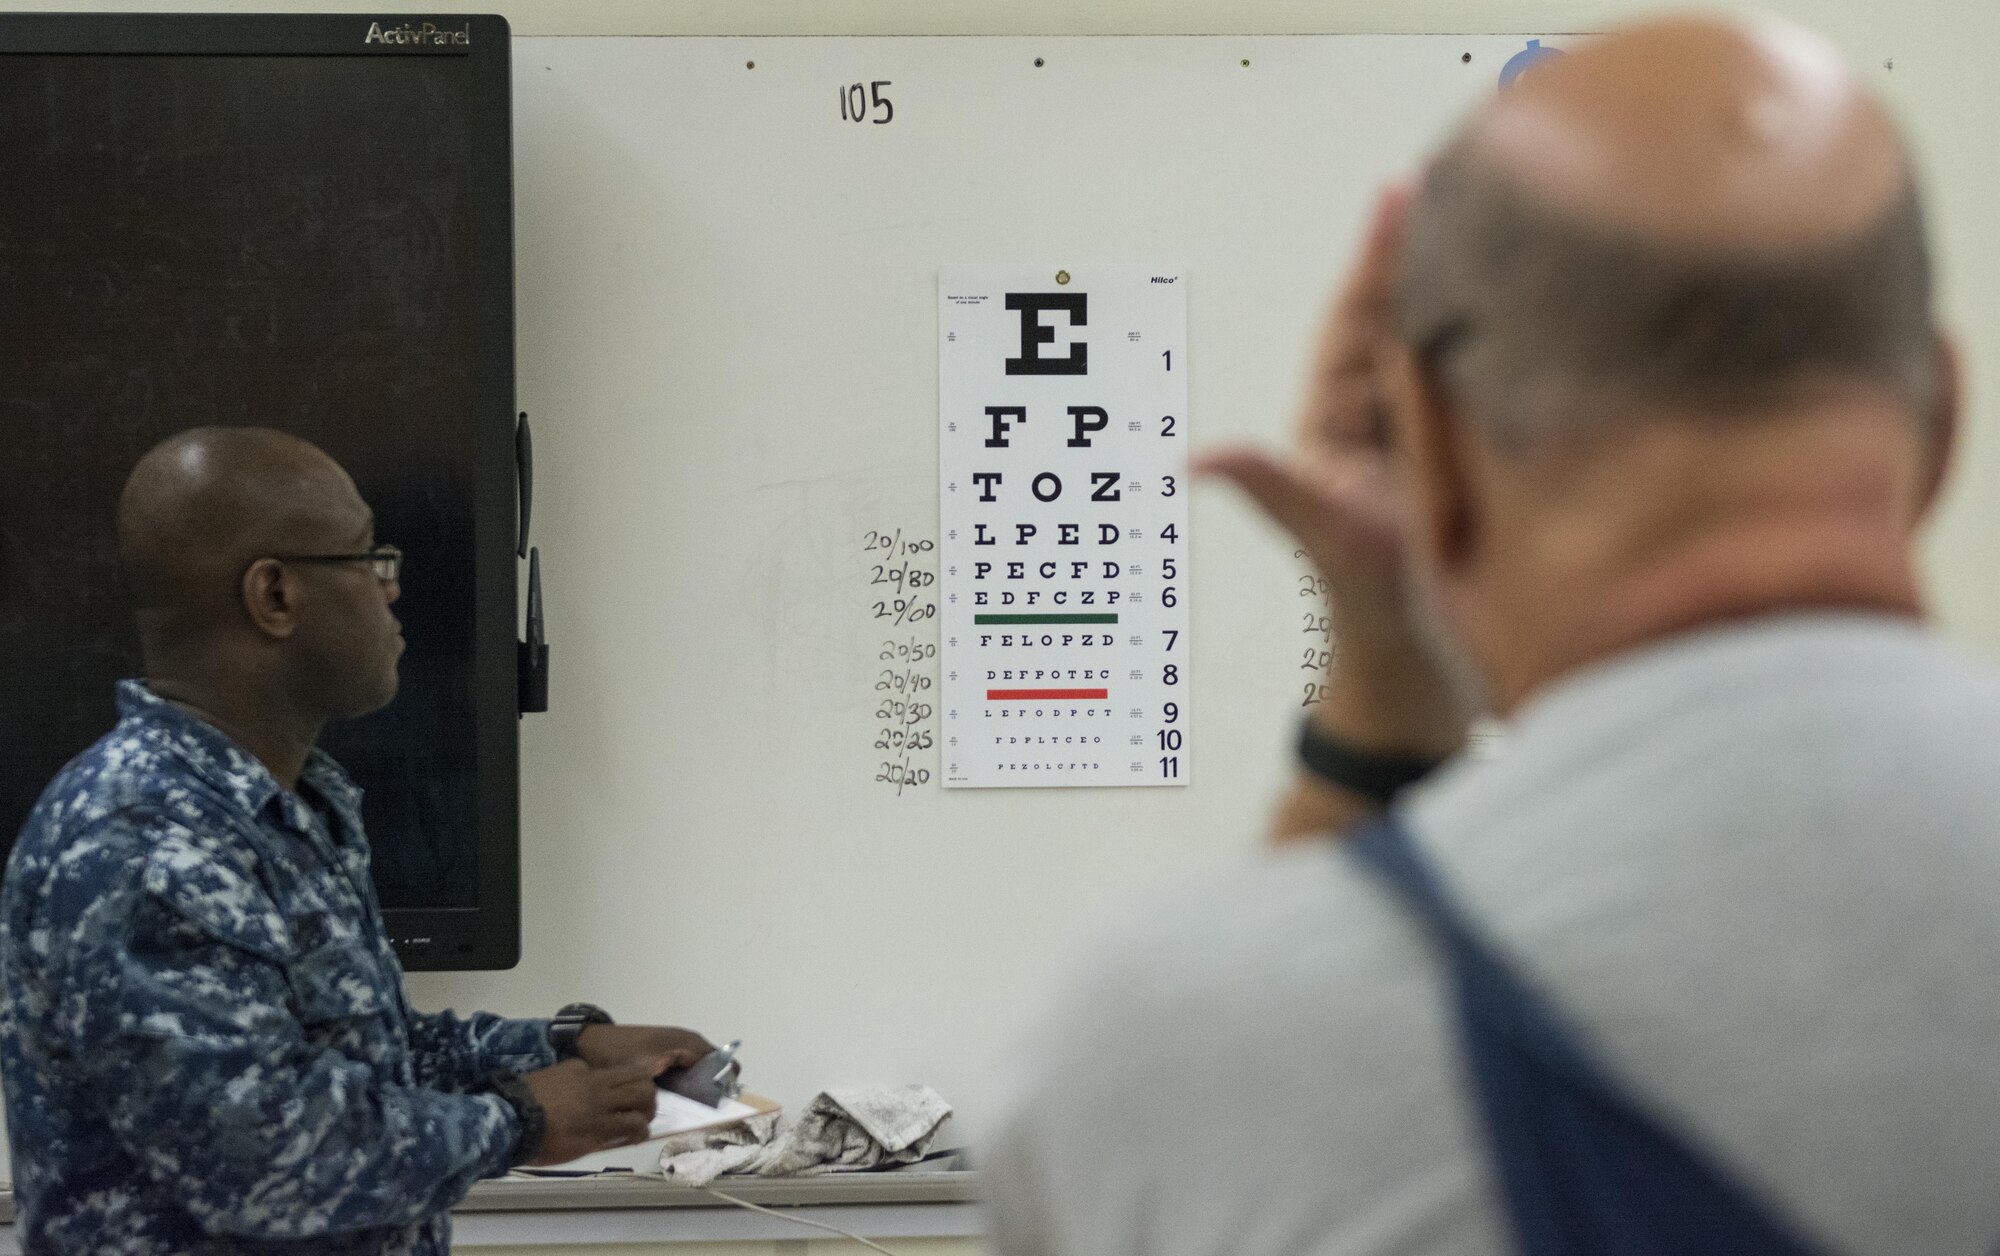 Navy HM2 Jeremiah King, a corpsman assigned to EMF Bathesda Naval Reserve Unit, Md. performs an eye exam on a patient at Swain County High School during Smoky Mountain Medical Innovative Readiness Training in Bryson City, N.C., on Aug. 3, 2017.